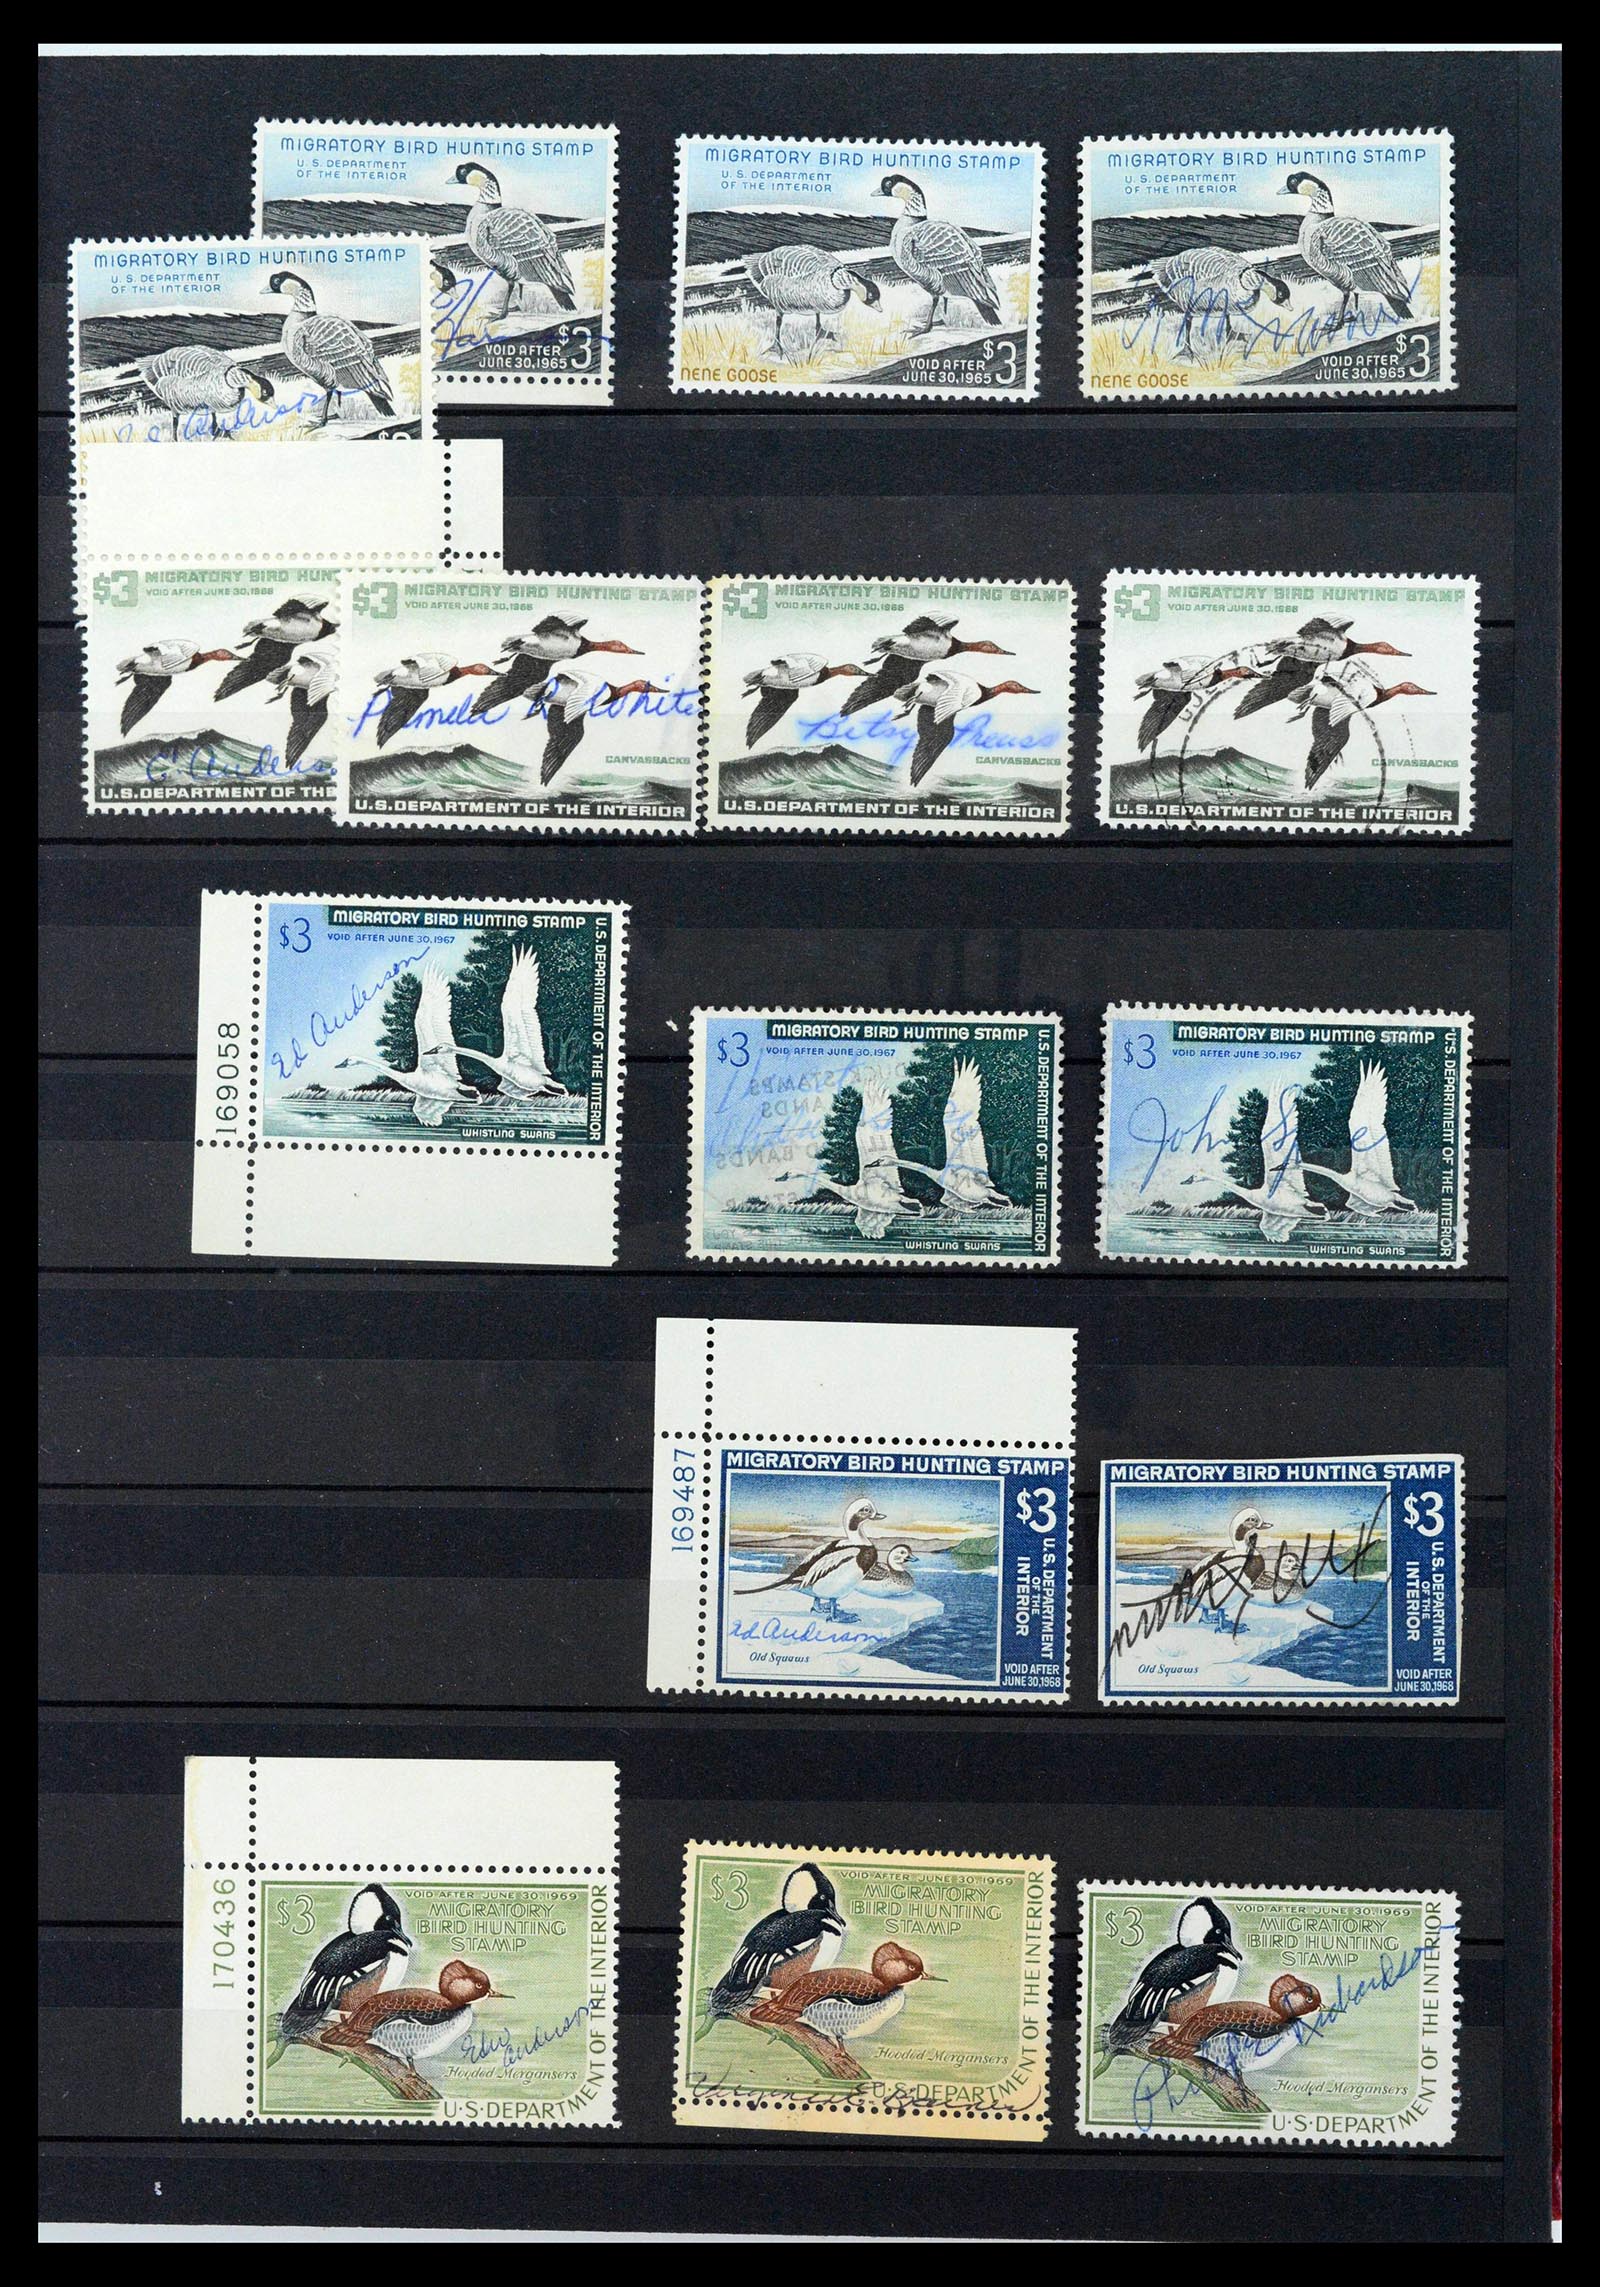 39426 0007 - Stamp collection 39426 USA duckstamps 1934-2007.